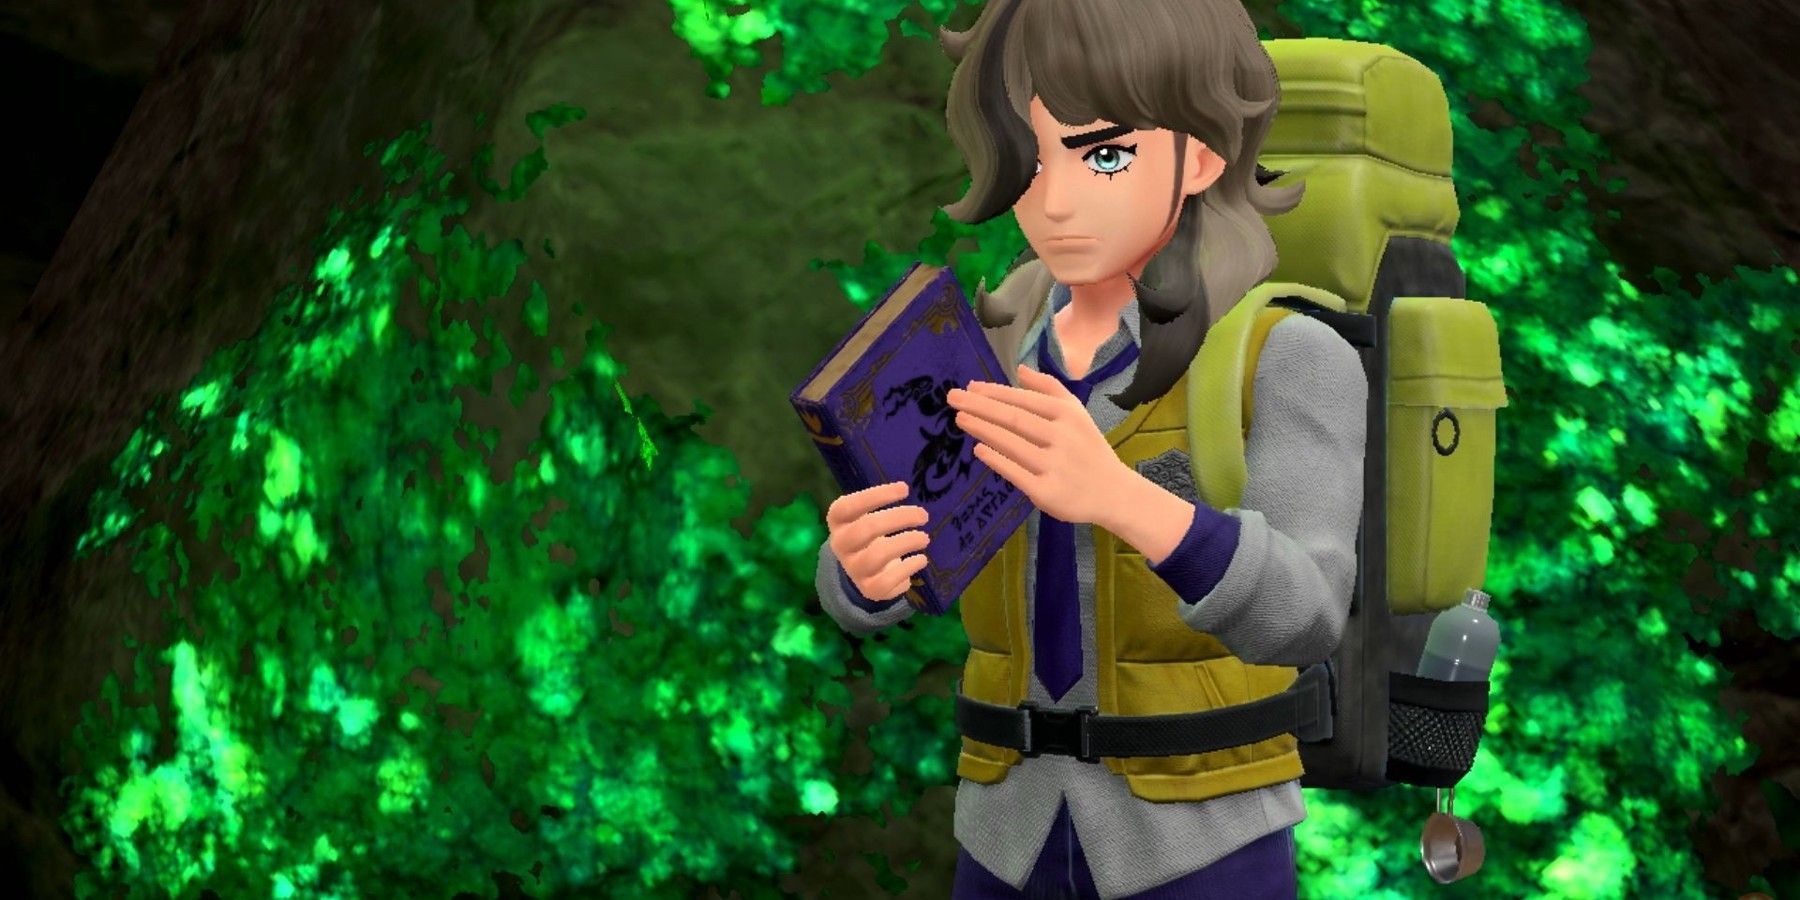 Arven holding a book about Herba Mystica in Pokemon Scarlet & Violet.